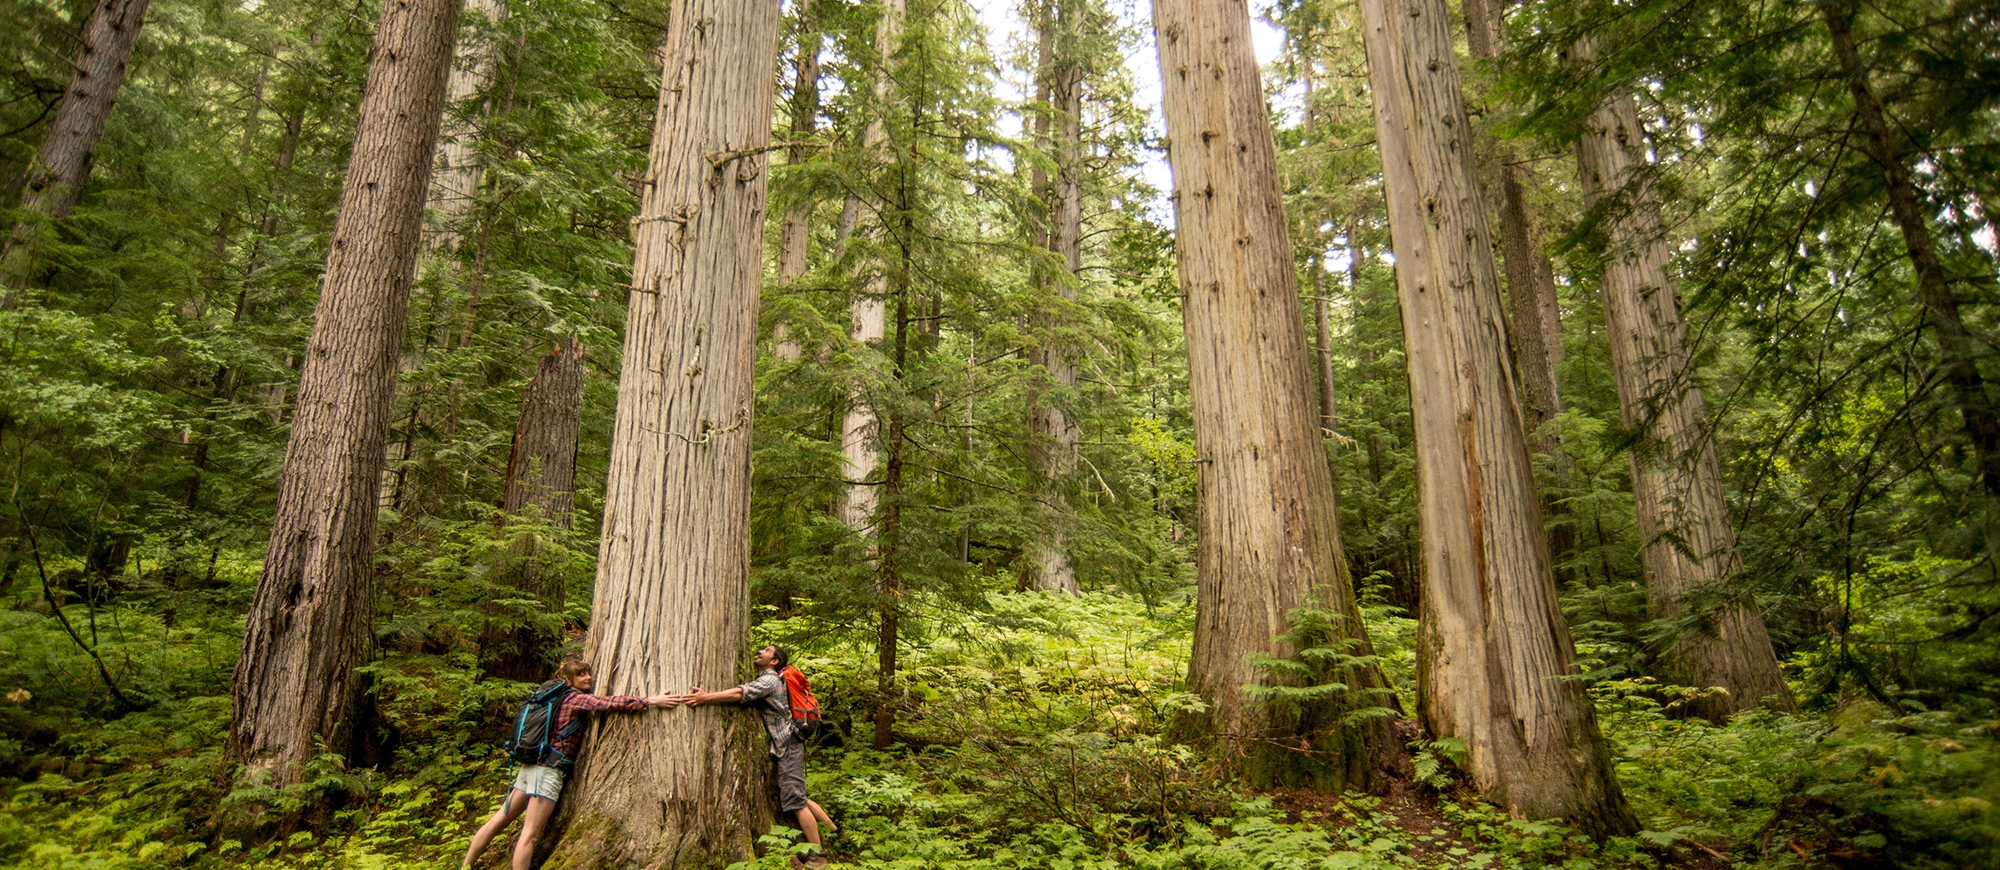 Two people in the Old Growth Forest of Kokanee glacier Provincial Park hugging a tree. 